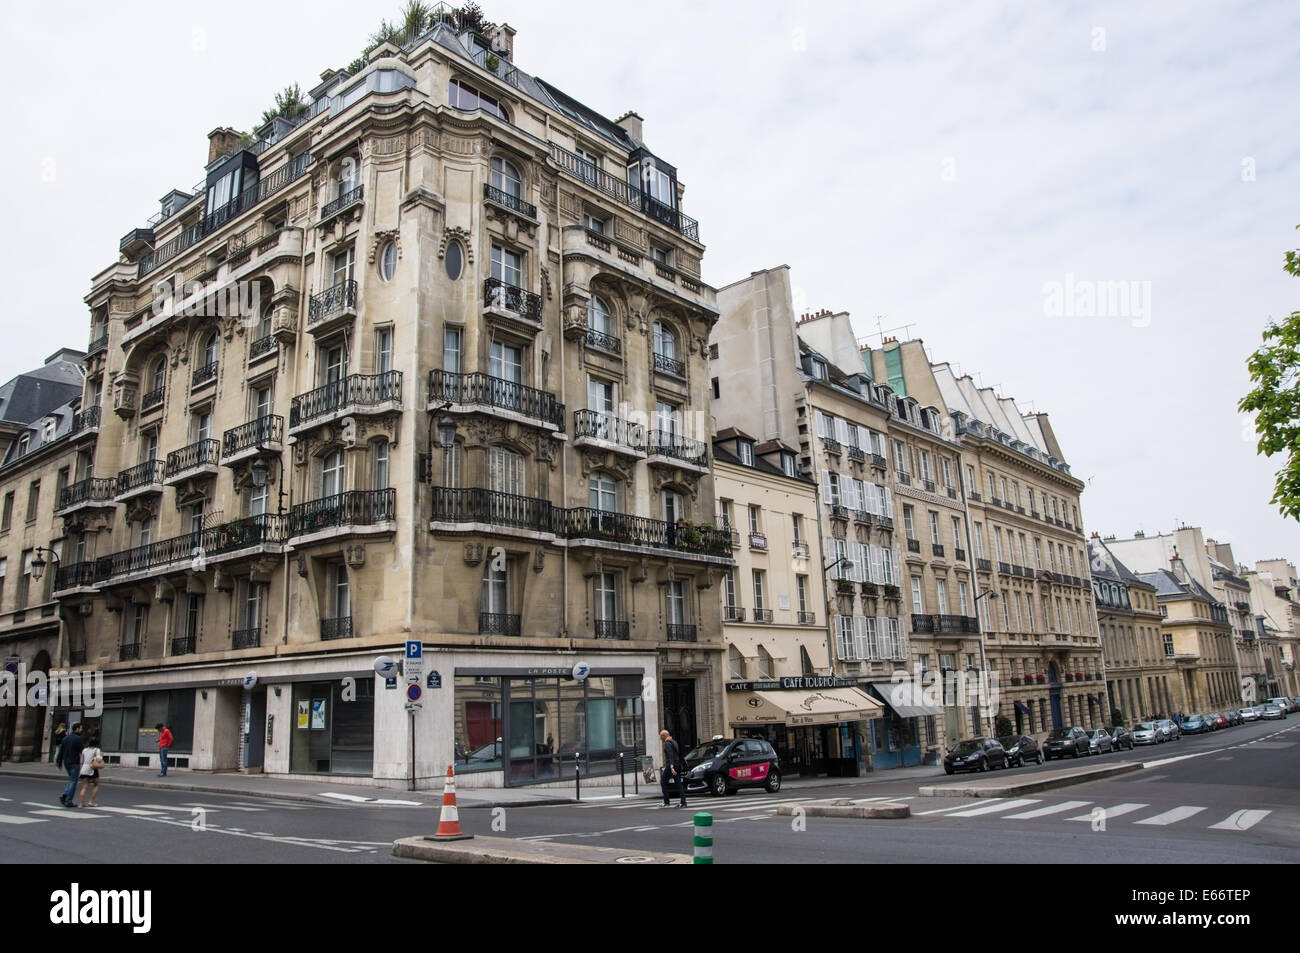 Historic residential buildings in Paris, France Stock Photo